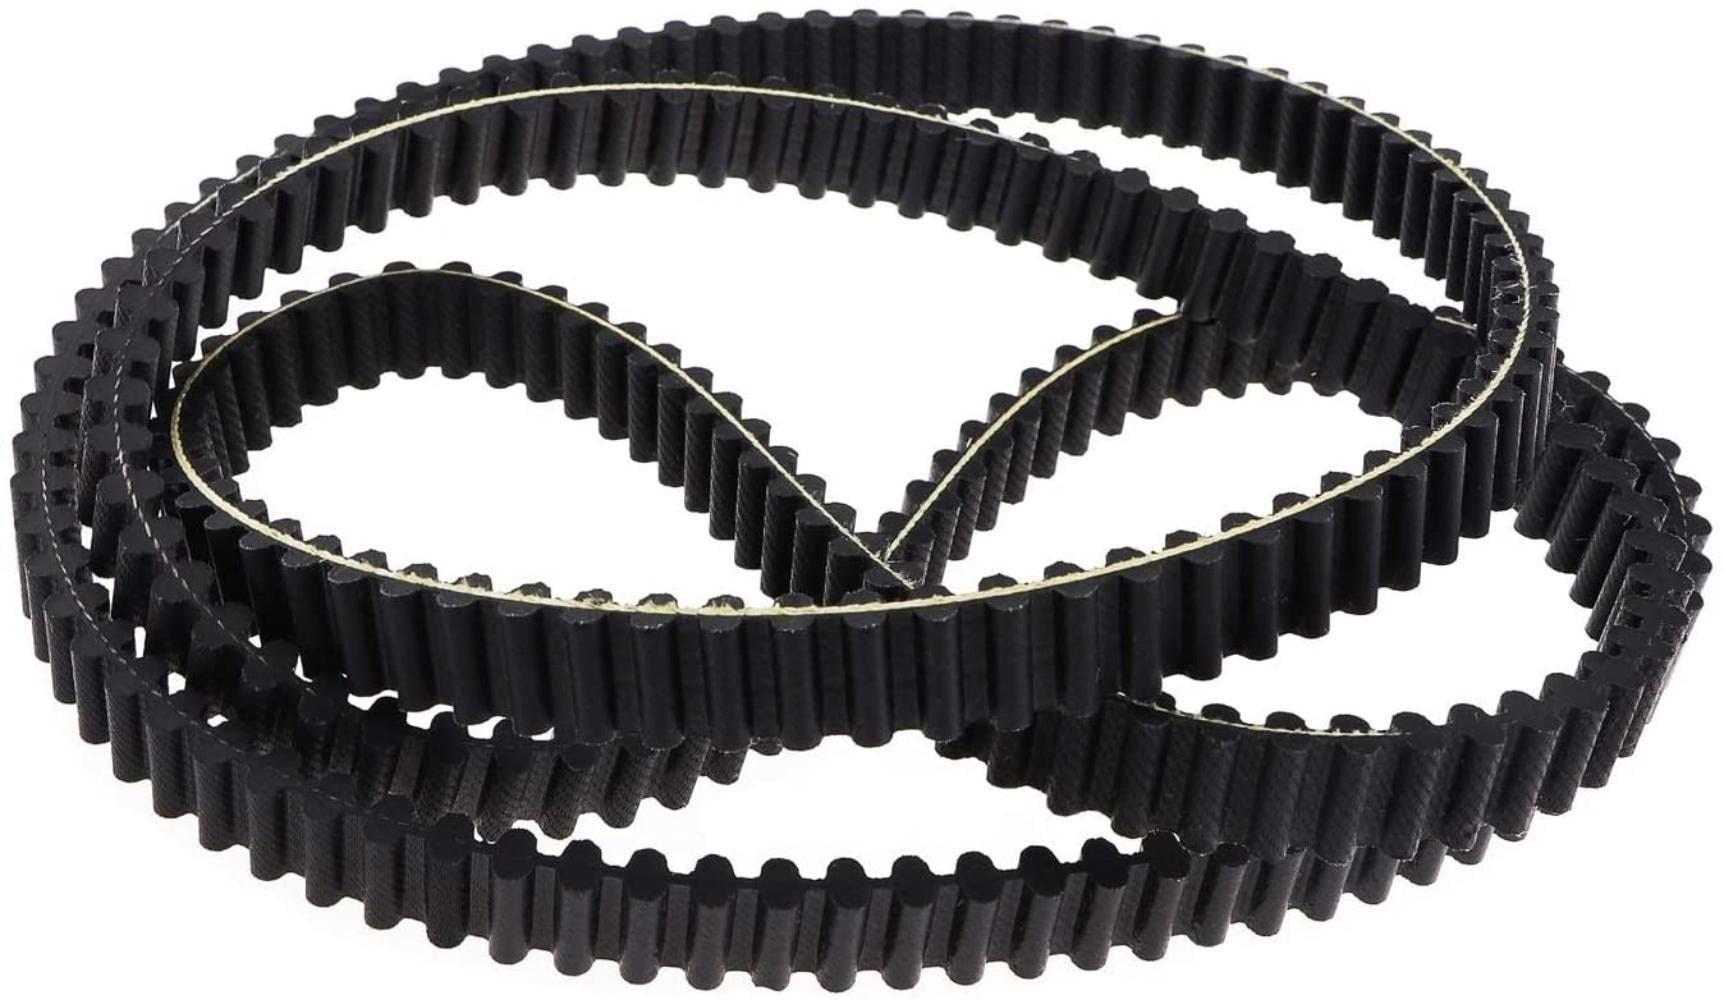 Synchronous timing JOHN DEERE OEM Replacement Belt Replace M127926 5/8X70 7/8 